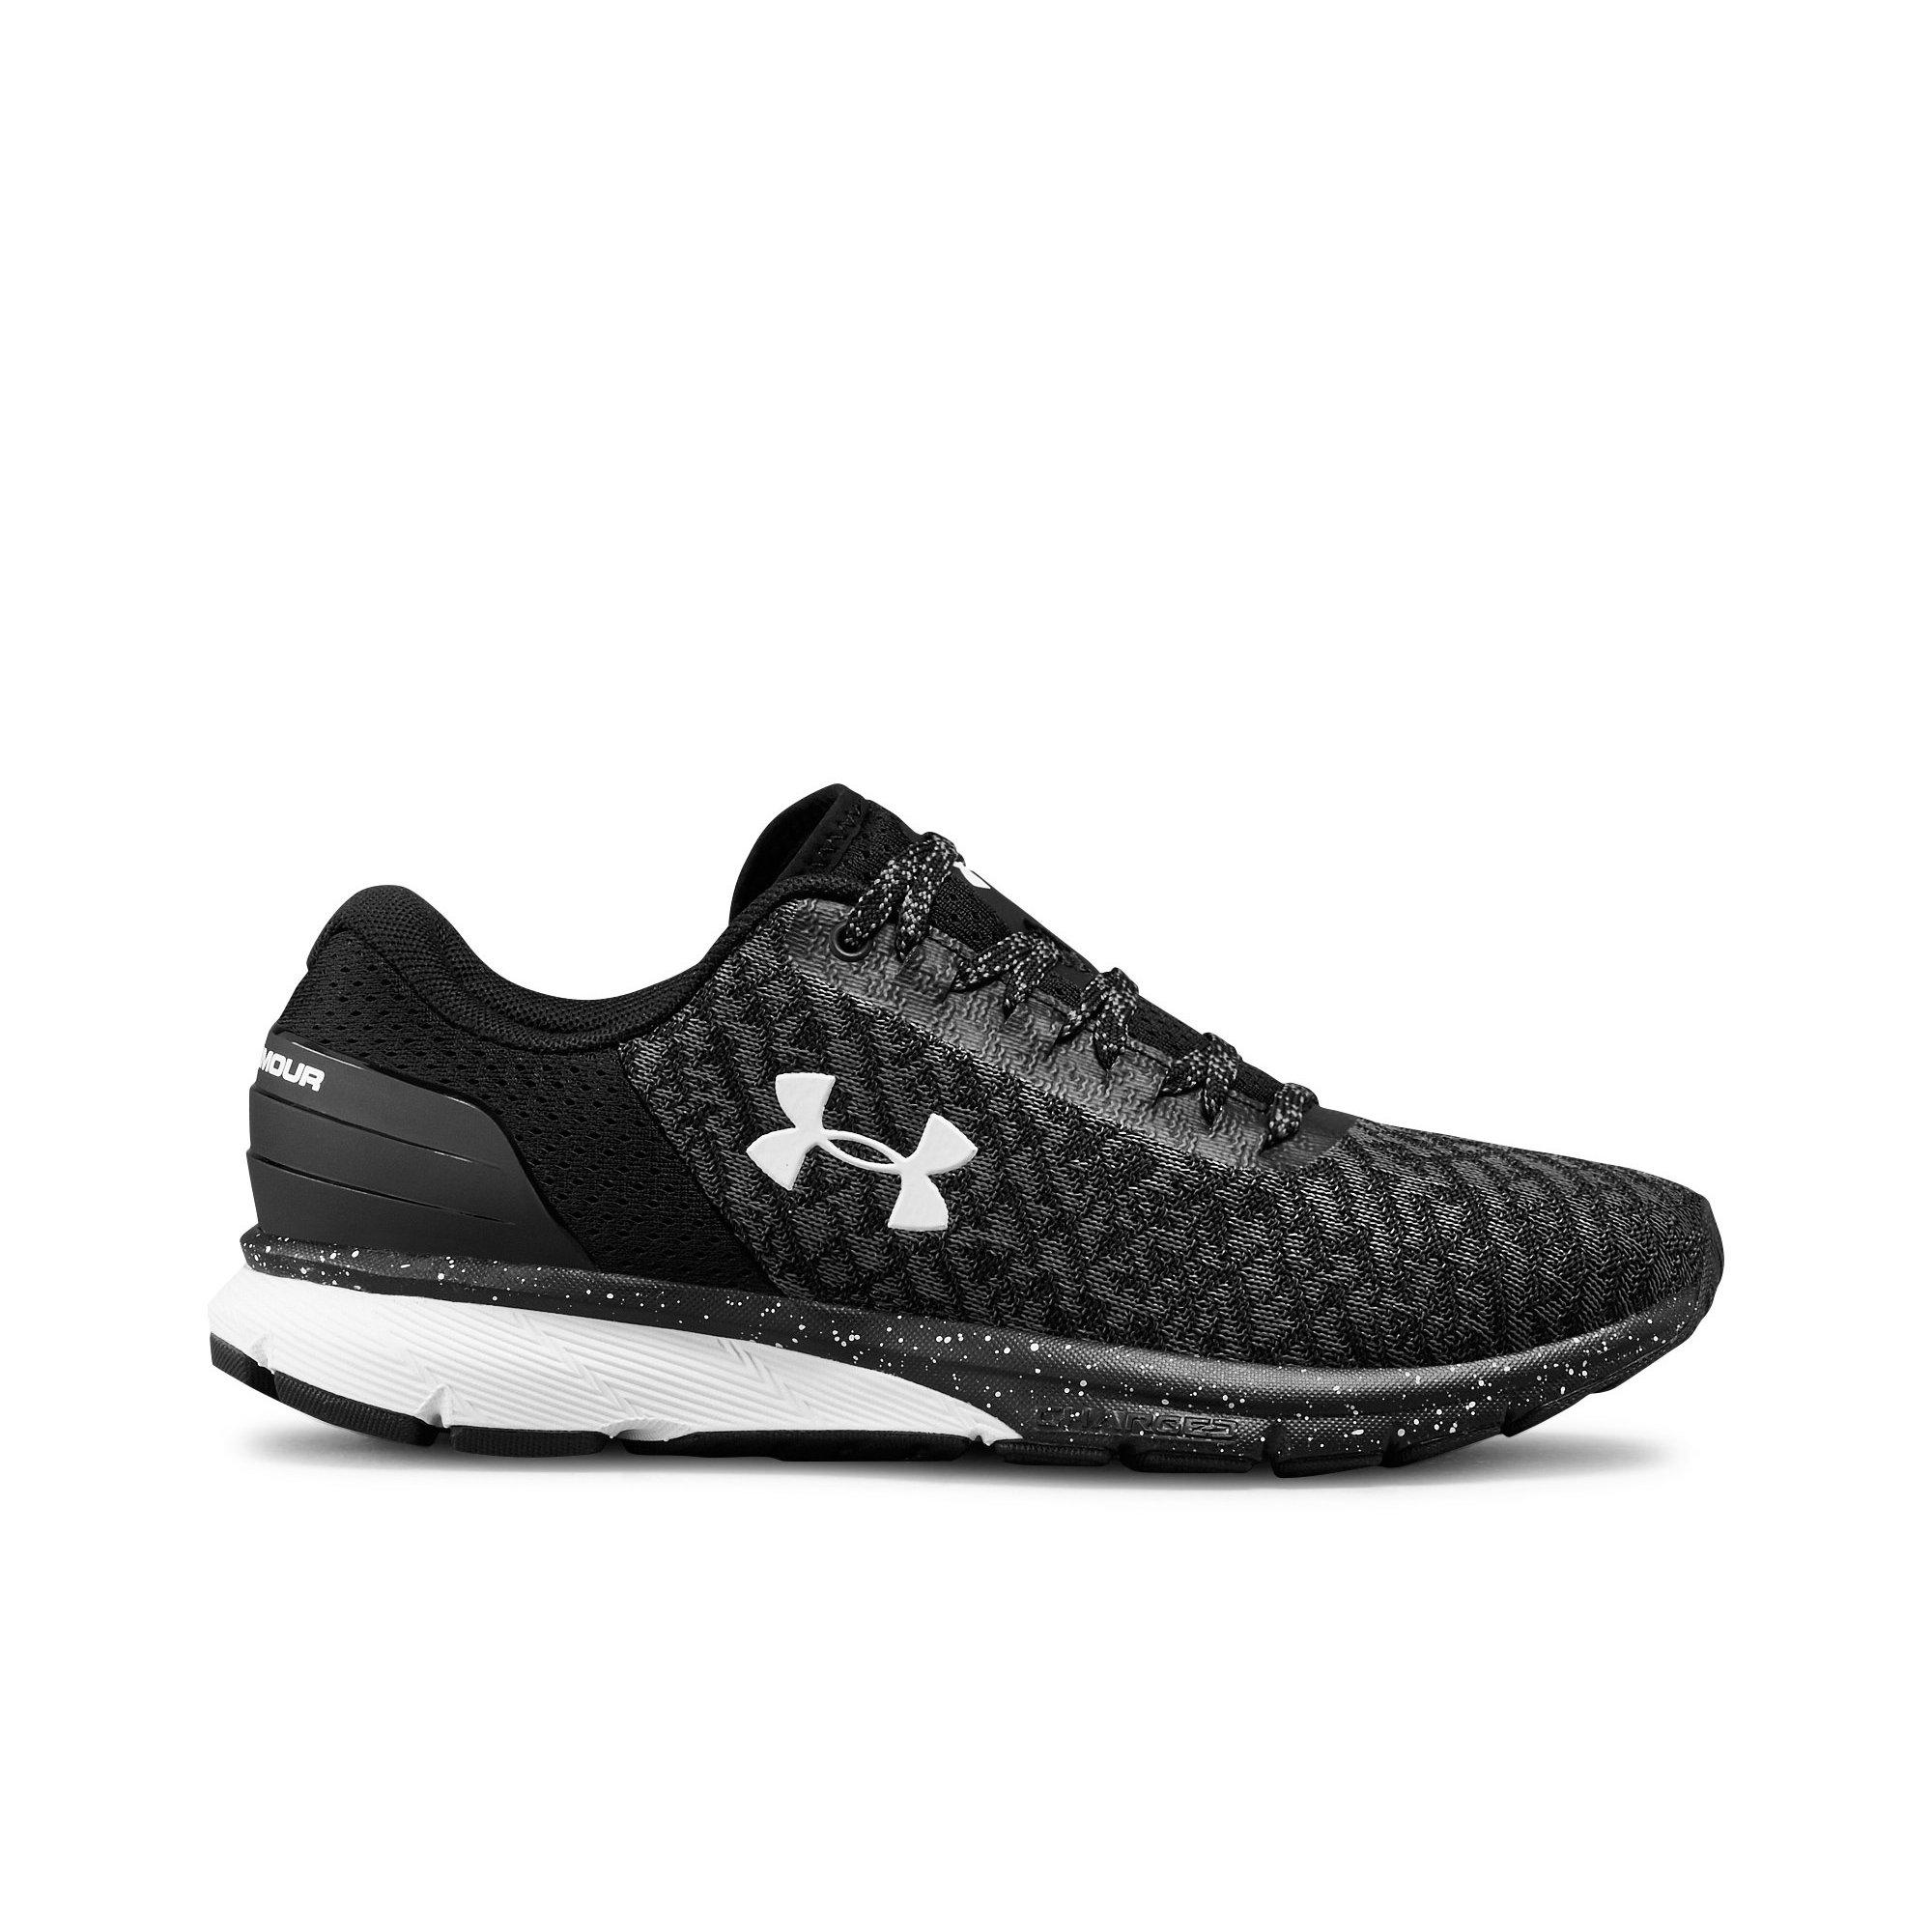 under armour womens shoes clearance